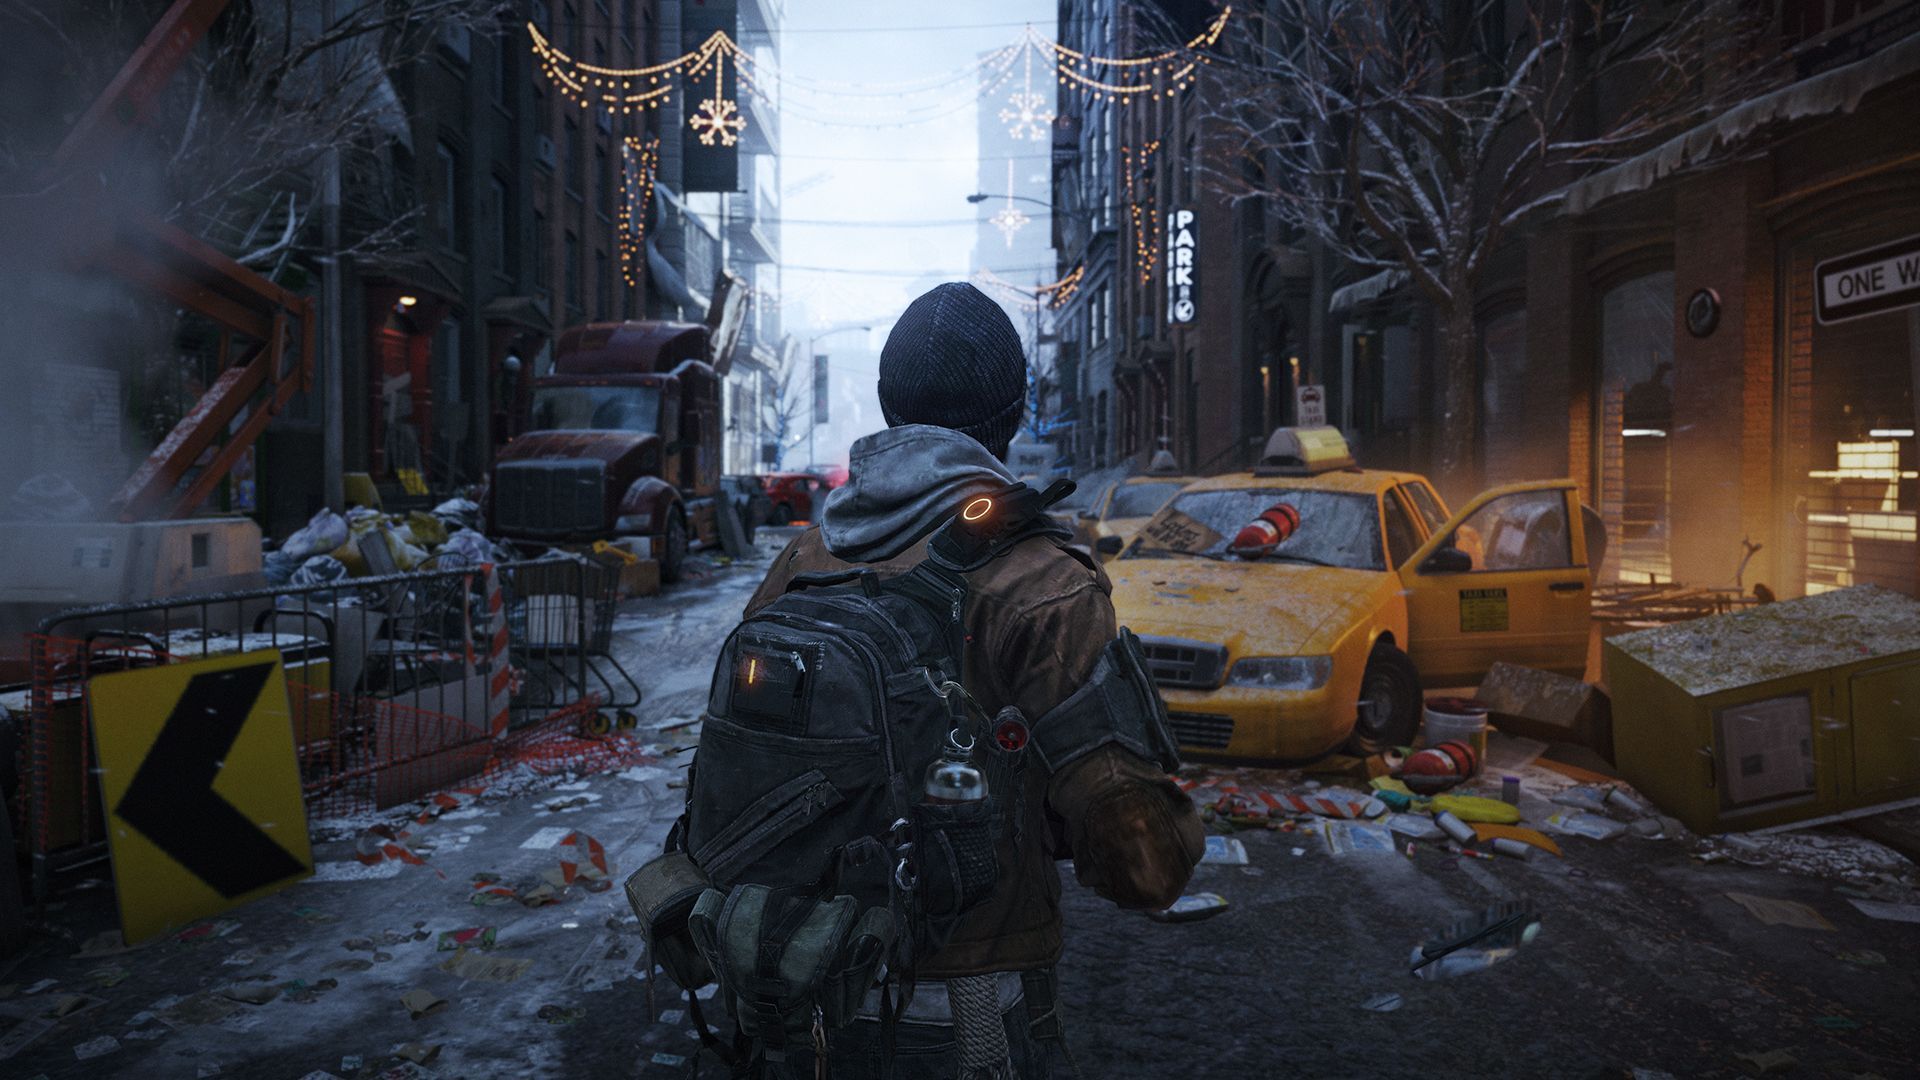 Tom Clancy's The division: walking the city streets wallpapers and ...